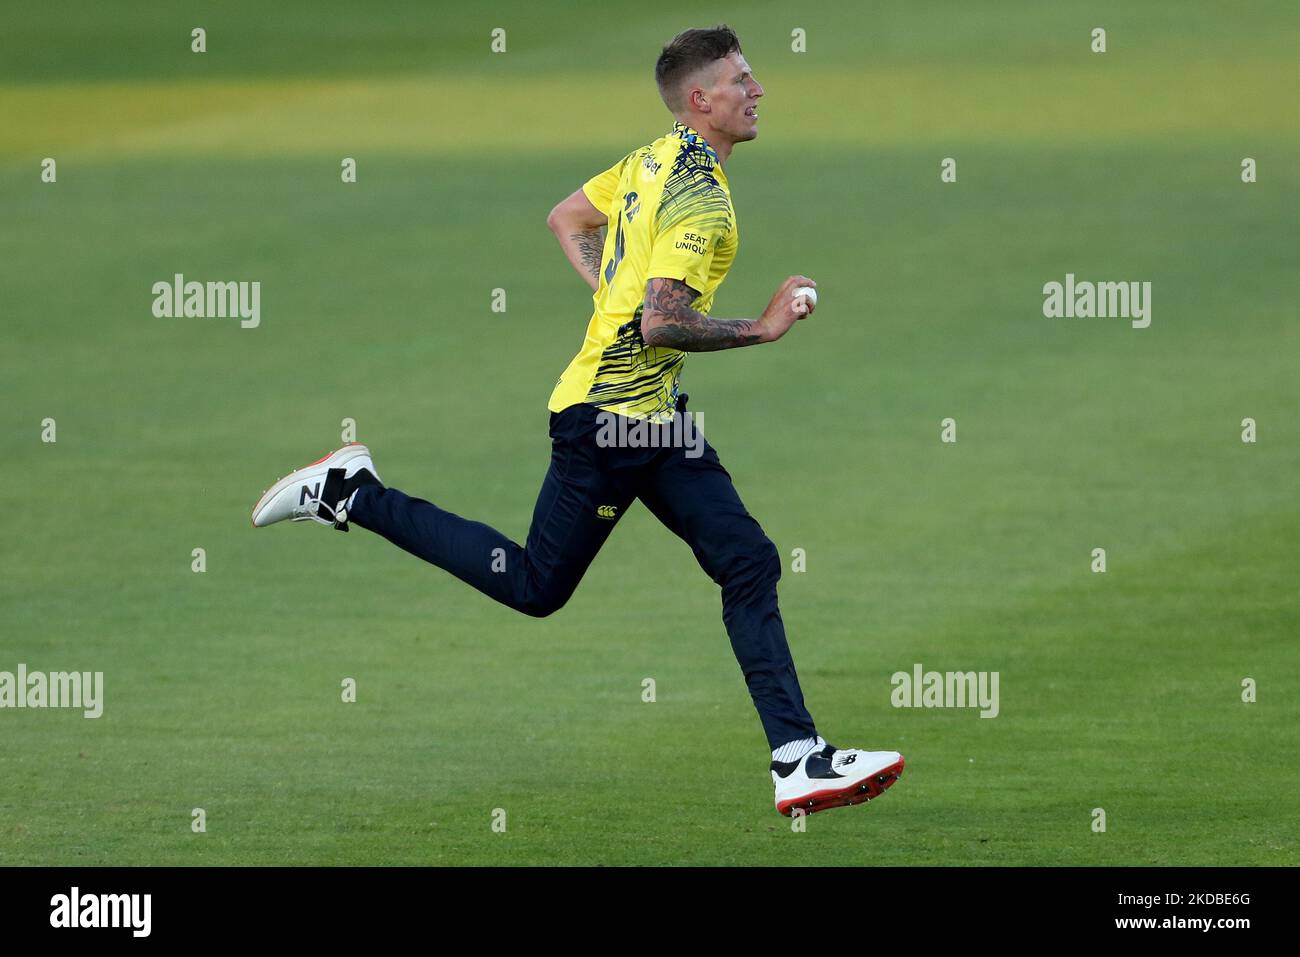 JUN 1st Brydon Carse of Durham bowling during the Vitality T20 Blast match between Durham County Cricket Club and Worcestershire at the Seat Unique Riverside, Chester le Street on Wednesday 1st June 2022. (Photo by Mark Fletcher /MI News/NurPhoto) Stock Photo